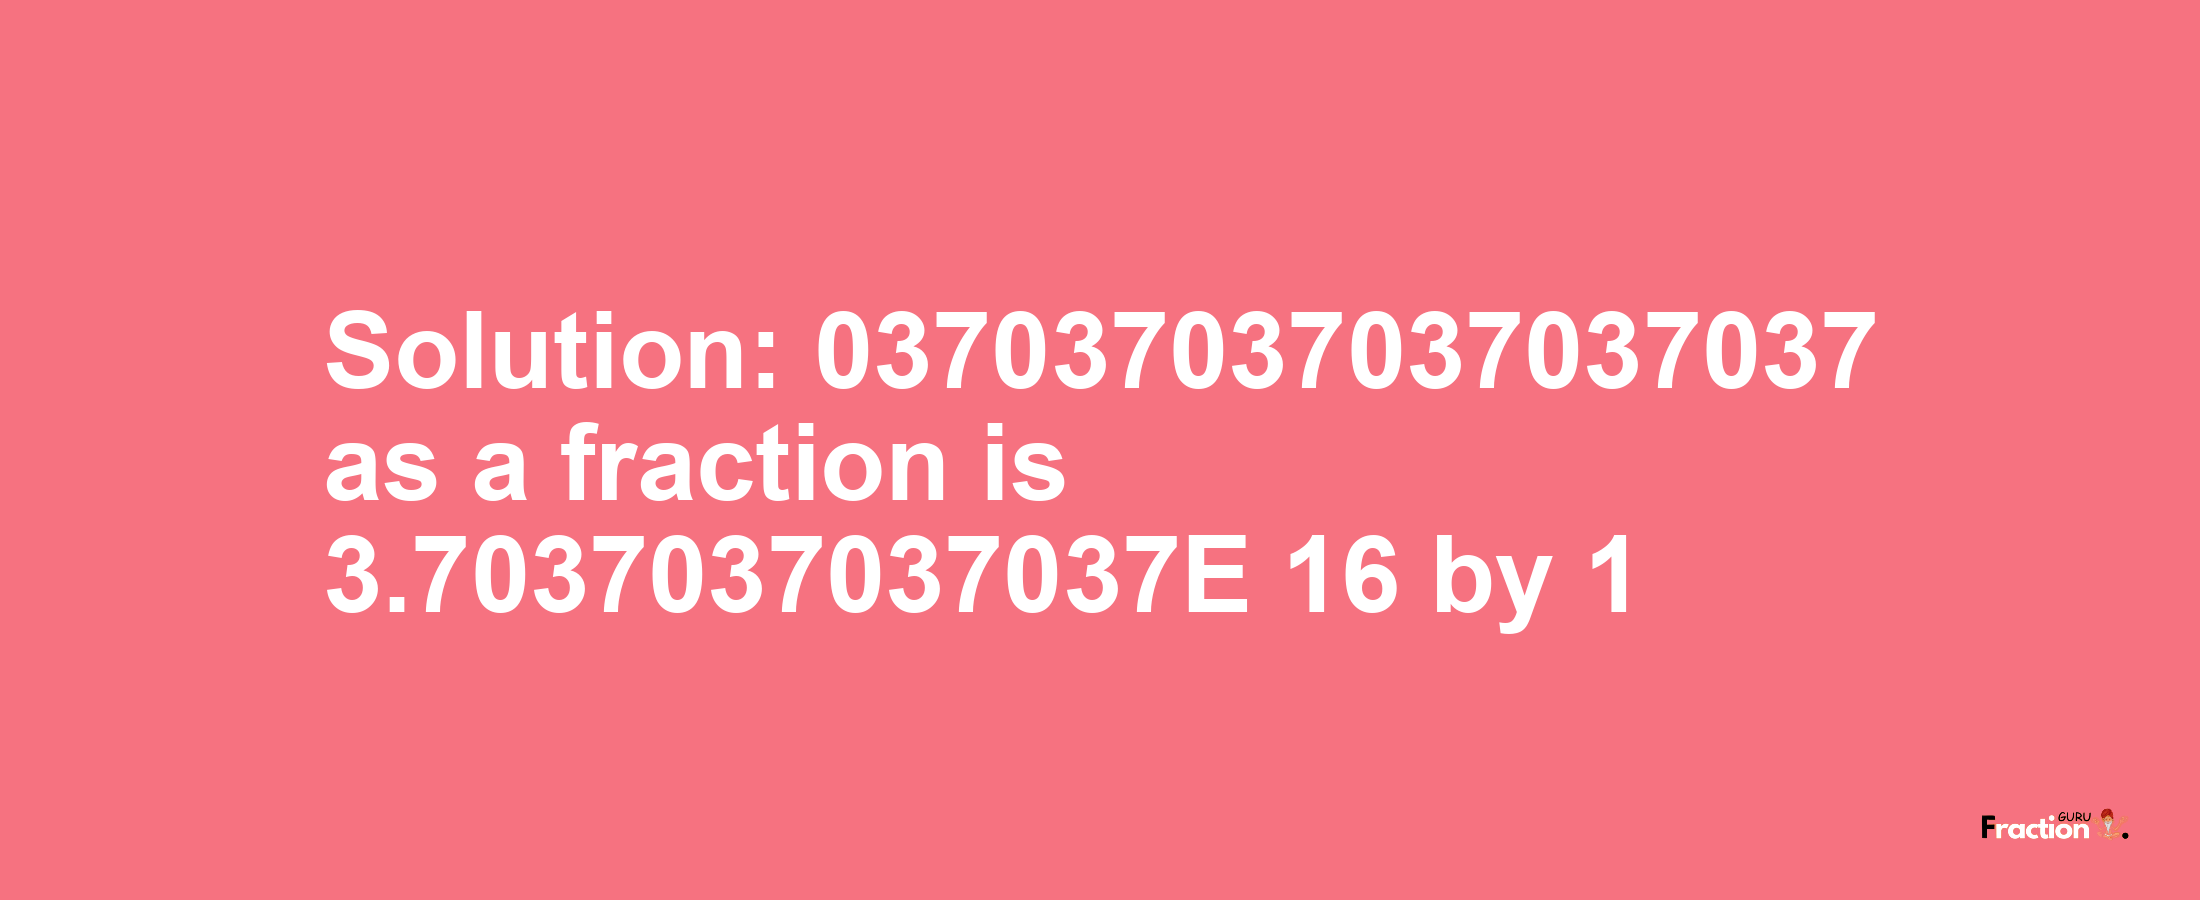 Solution:037037037037037037 as a fraction is 3.7037037037037E+16/1